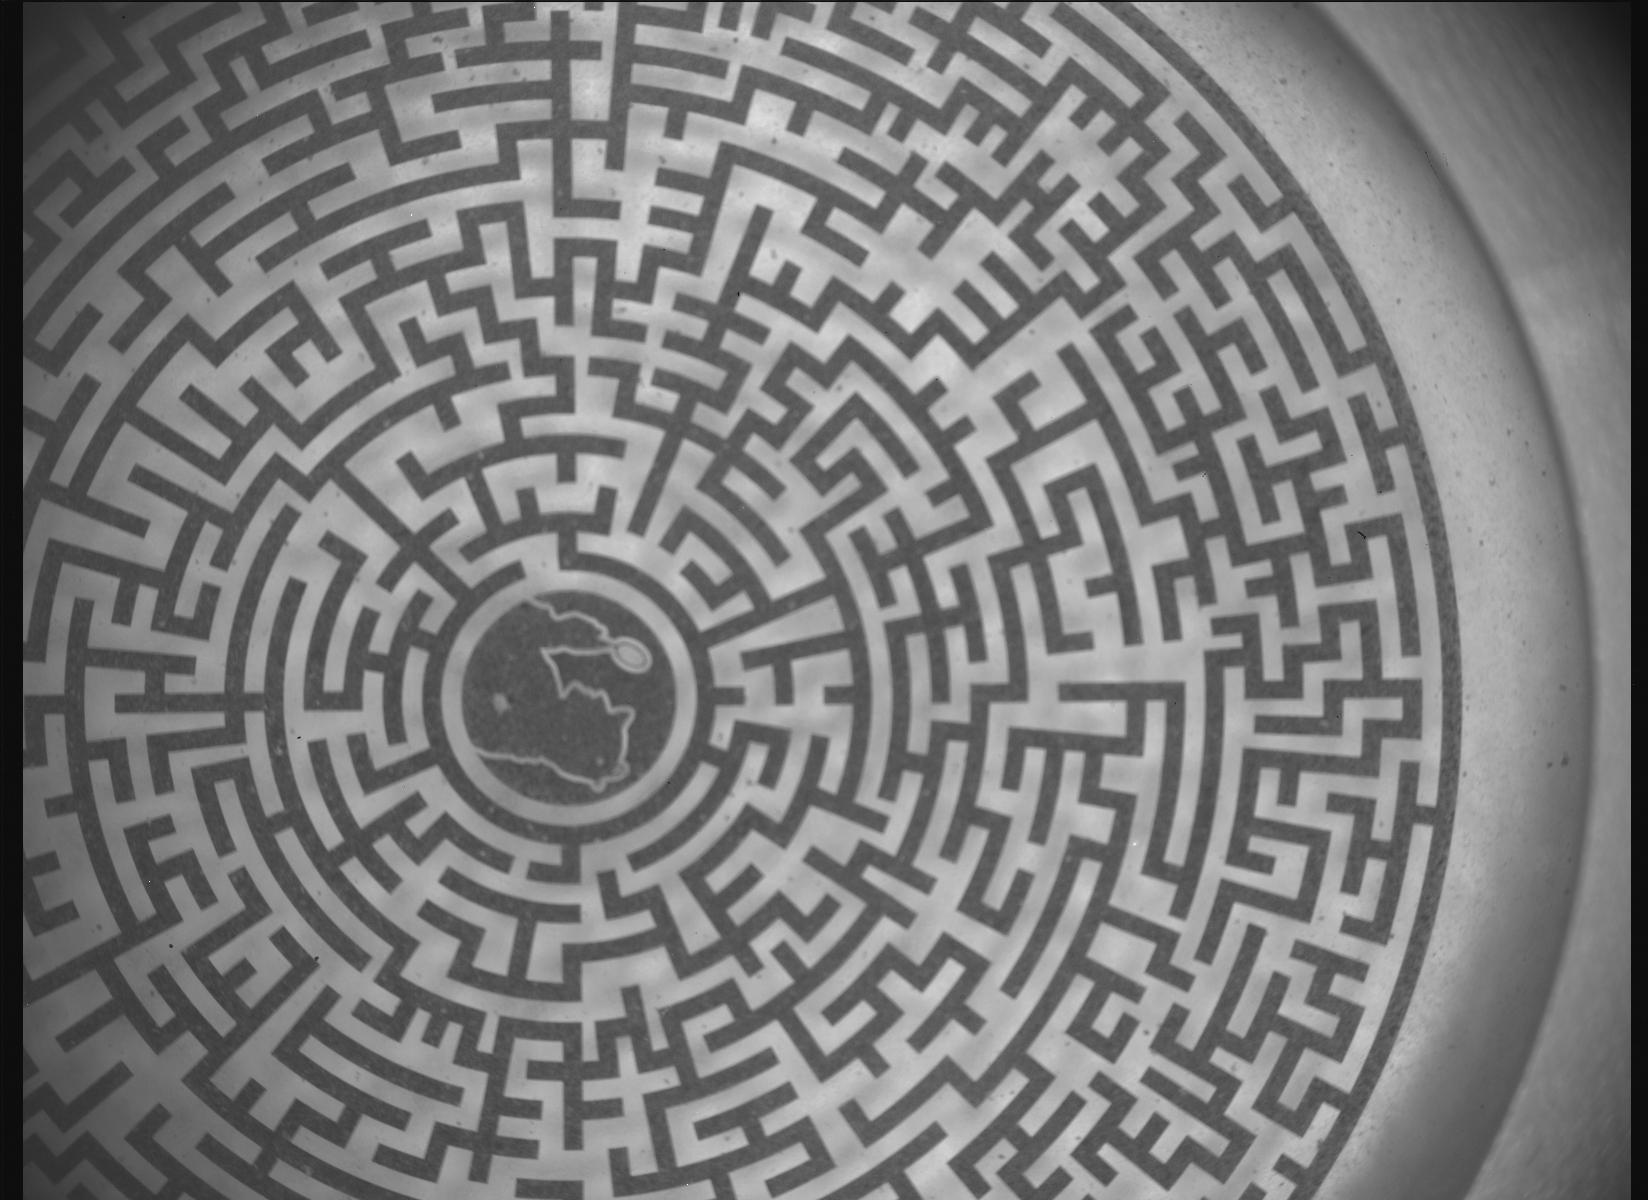 A black and white image of a circular labyrinth. A silhouette of Sherlock Holmes holding a magnifying glass is at the center of the labyrinth.